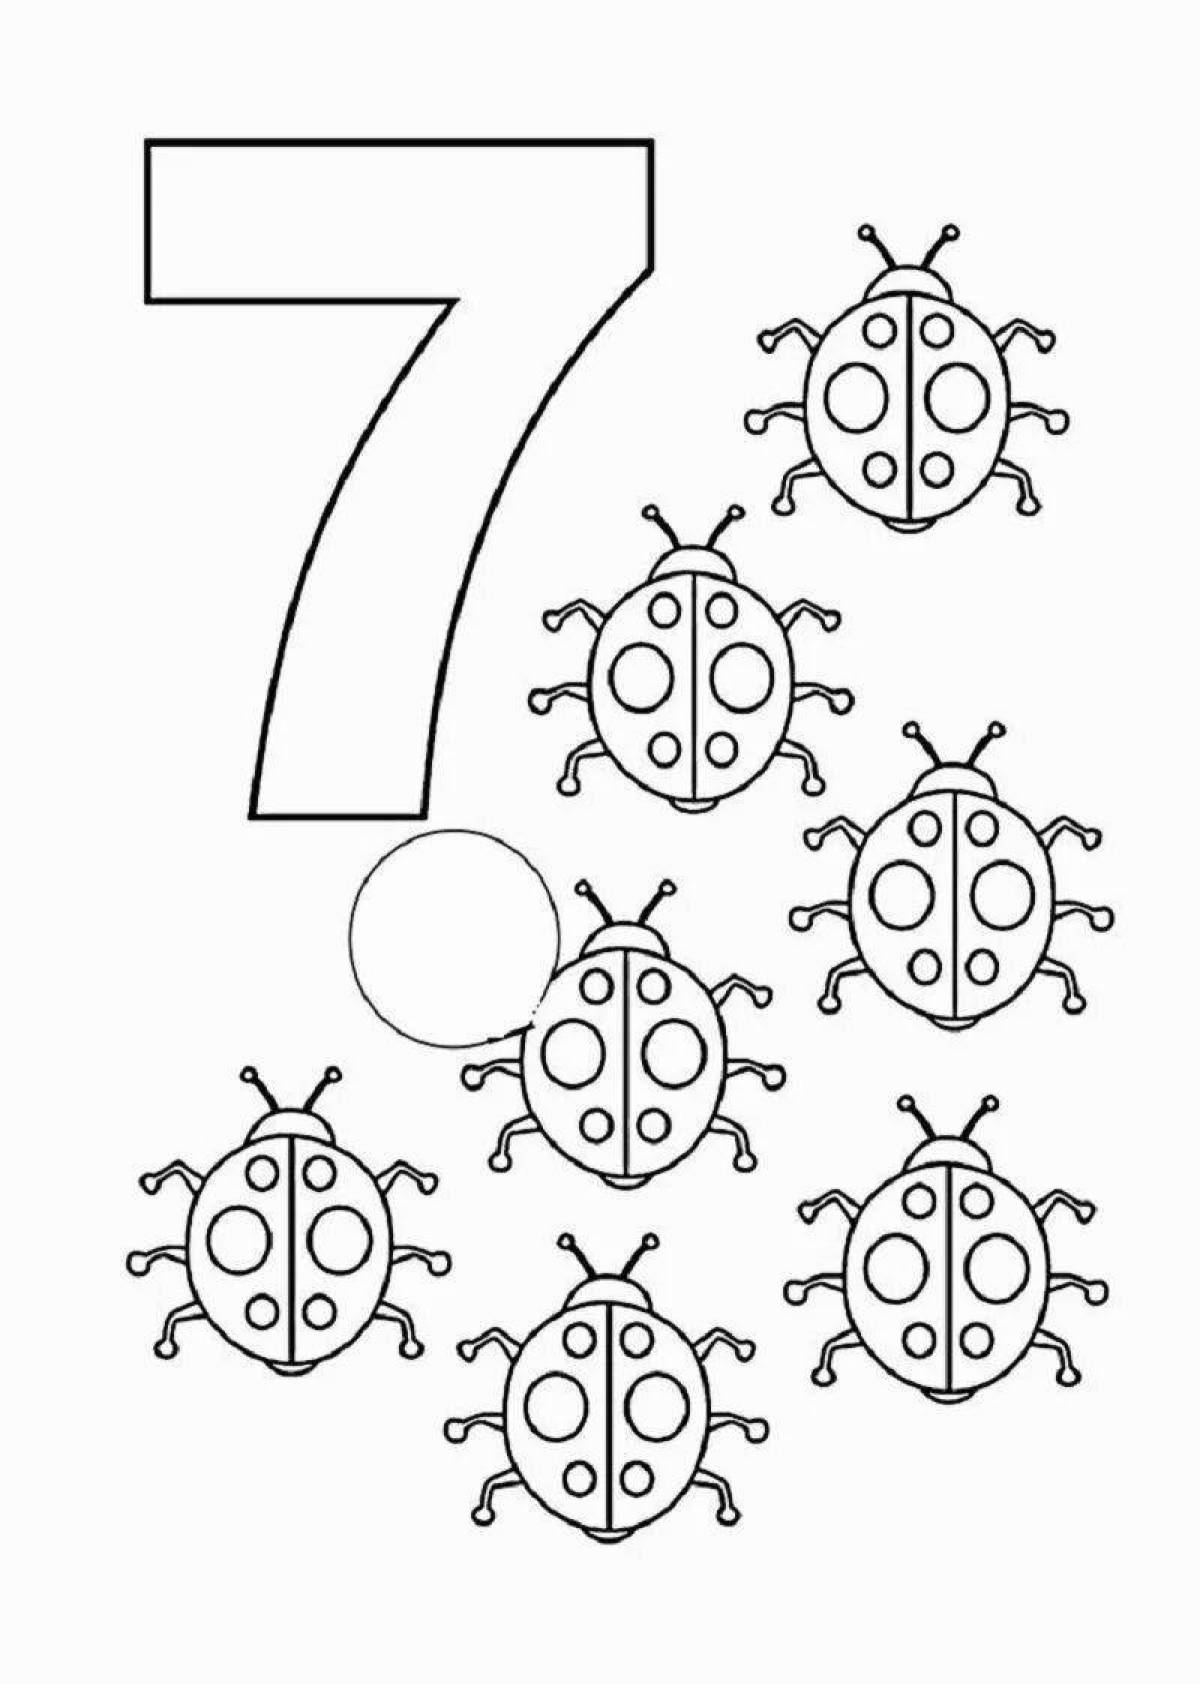 Colorful number 7 coloring book for kids